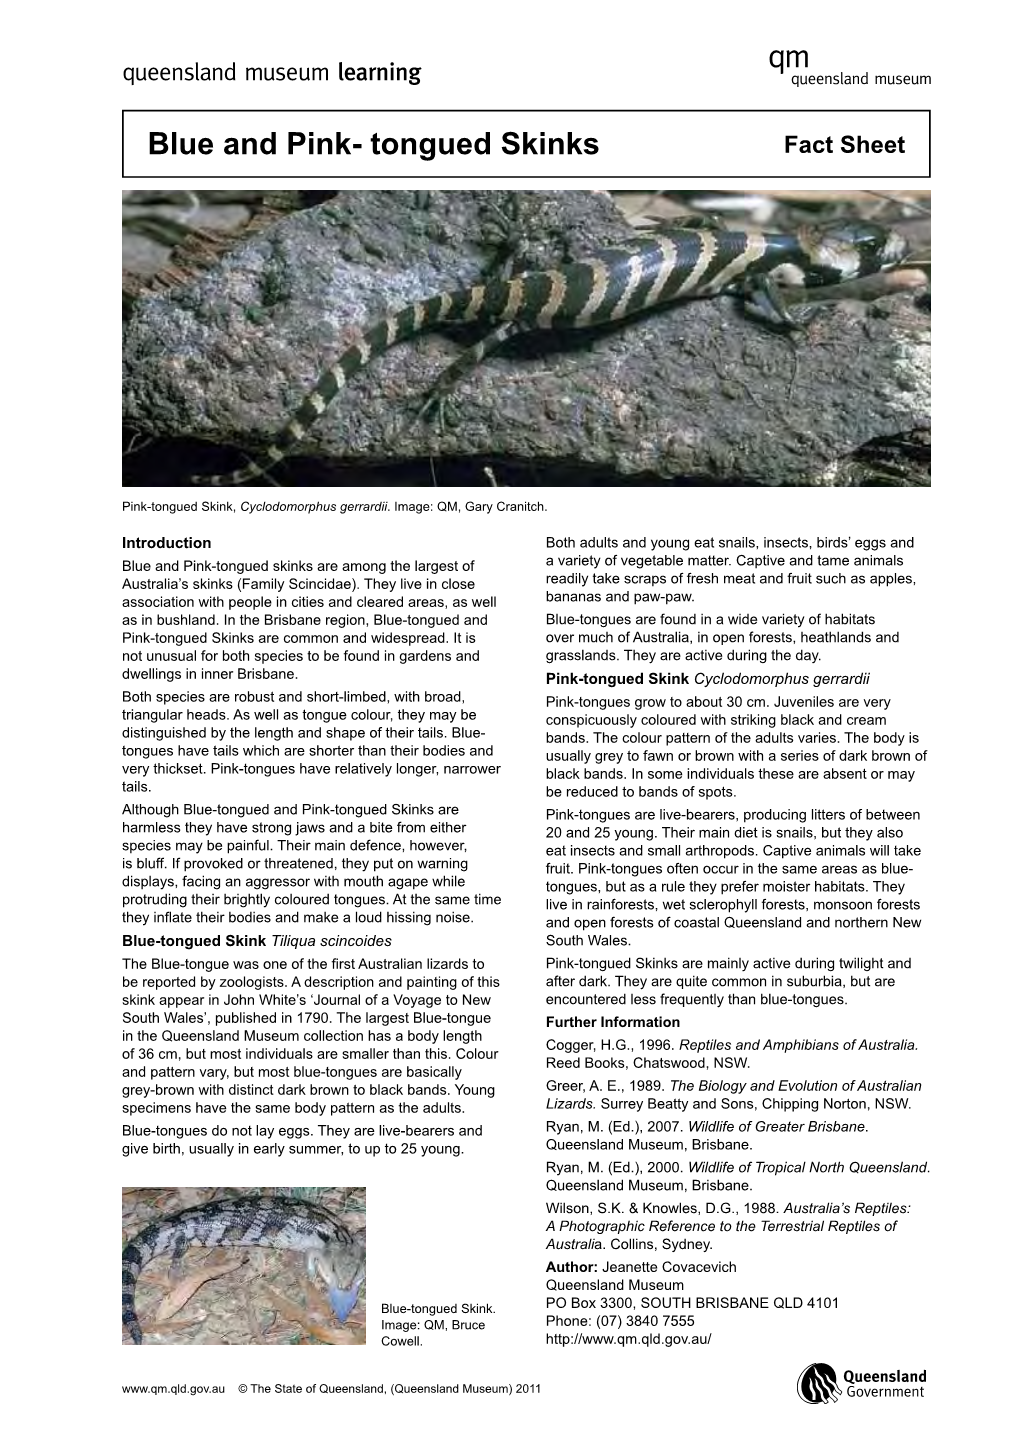 Blue and Pink- Tongued Skinks Fact Sheet